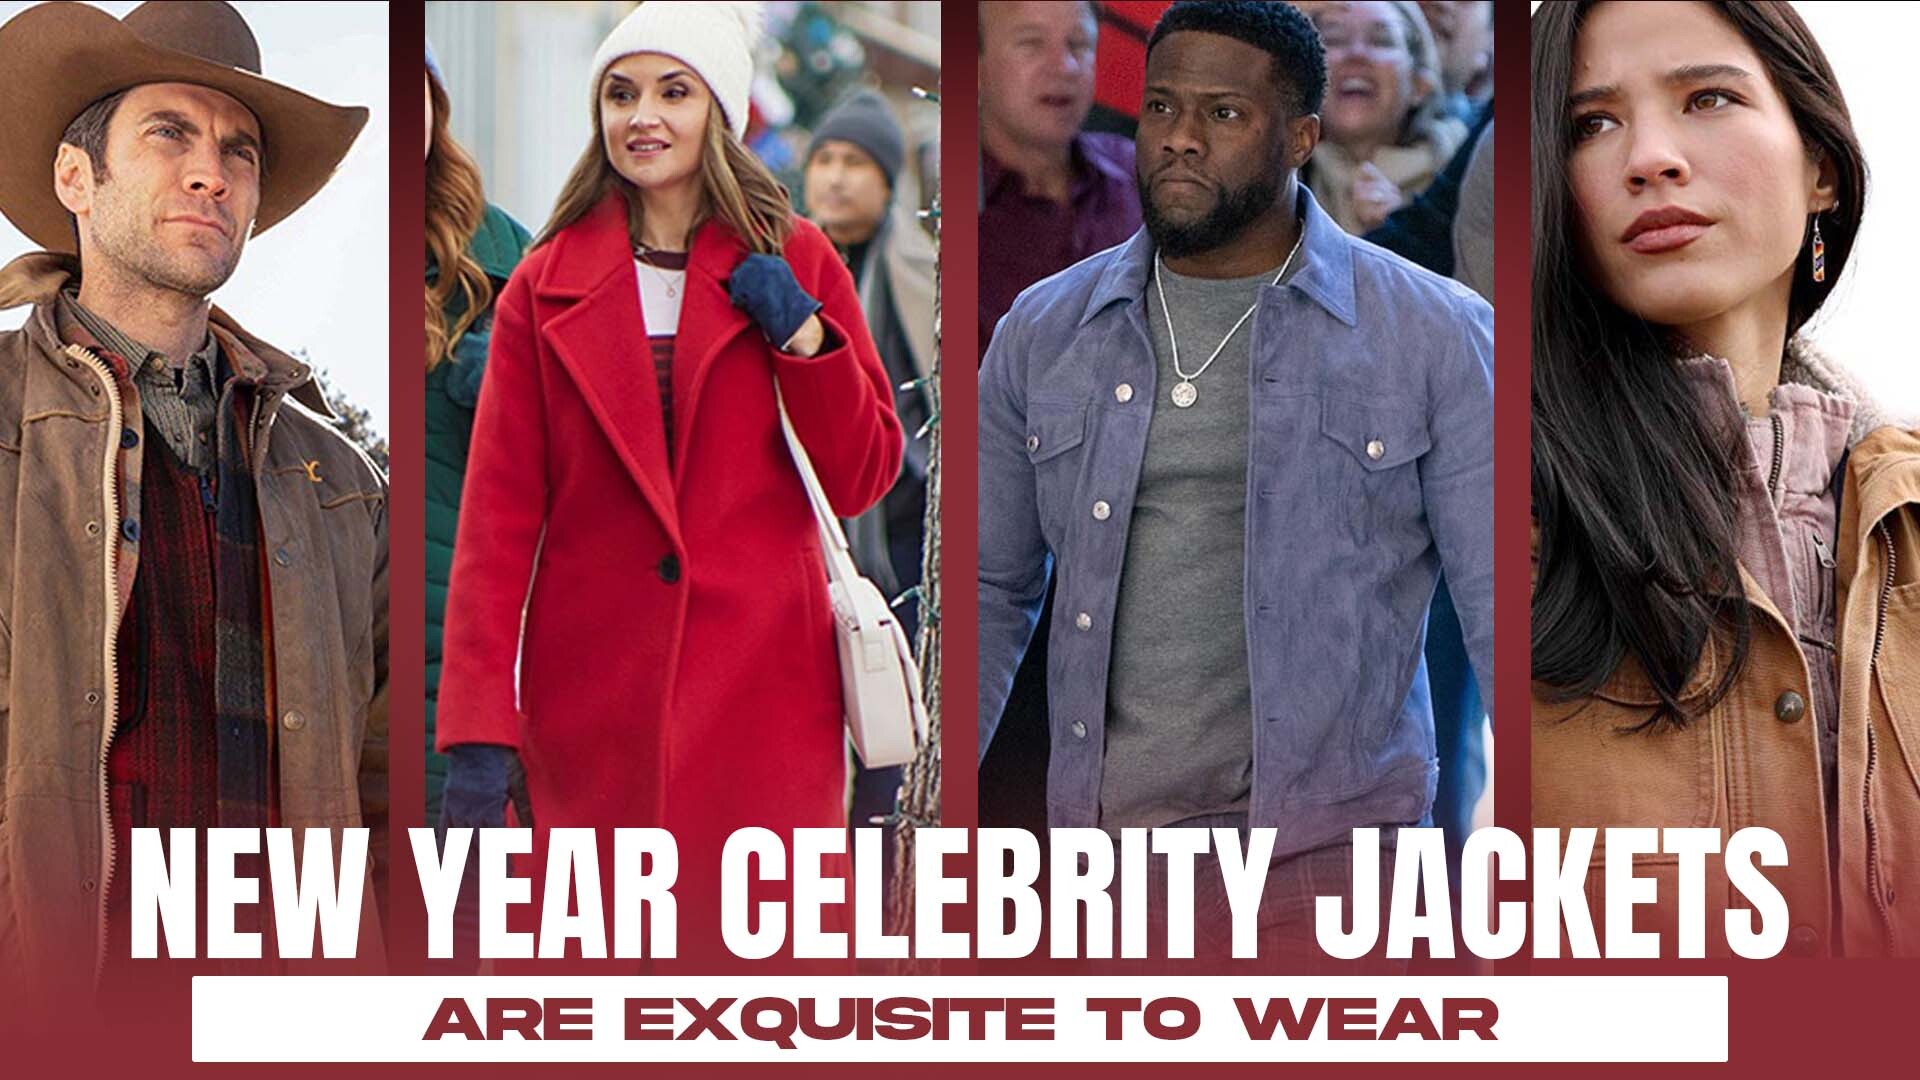 New Year Celebrity Jackets Are Exquisite To Wear